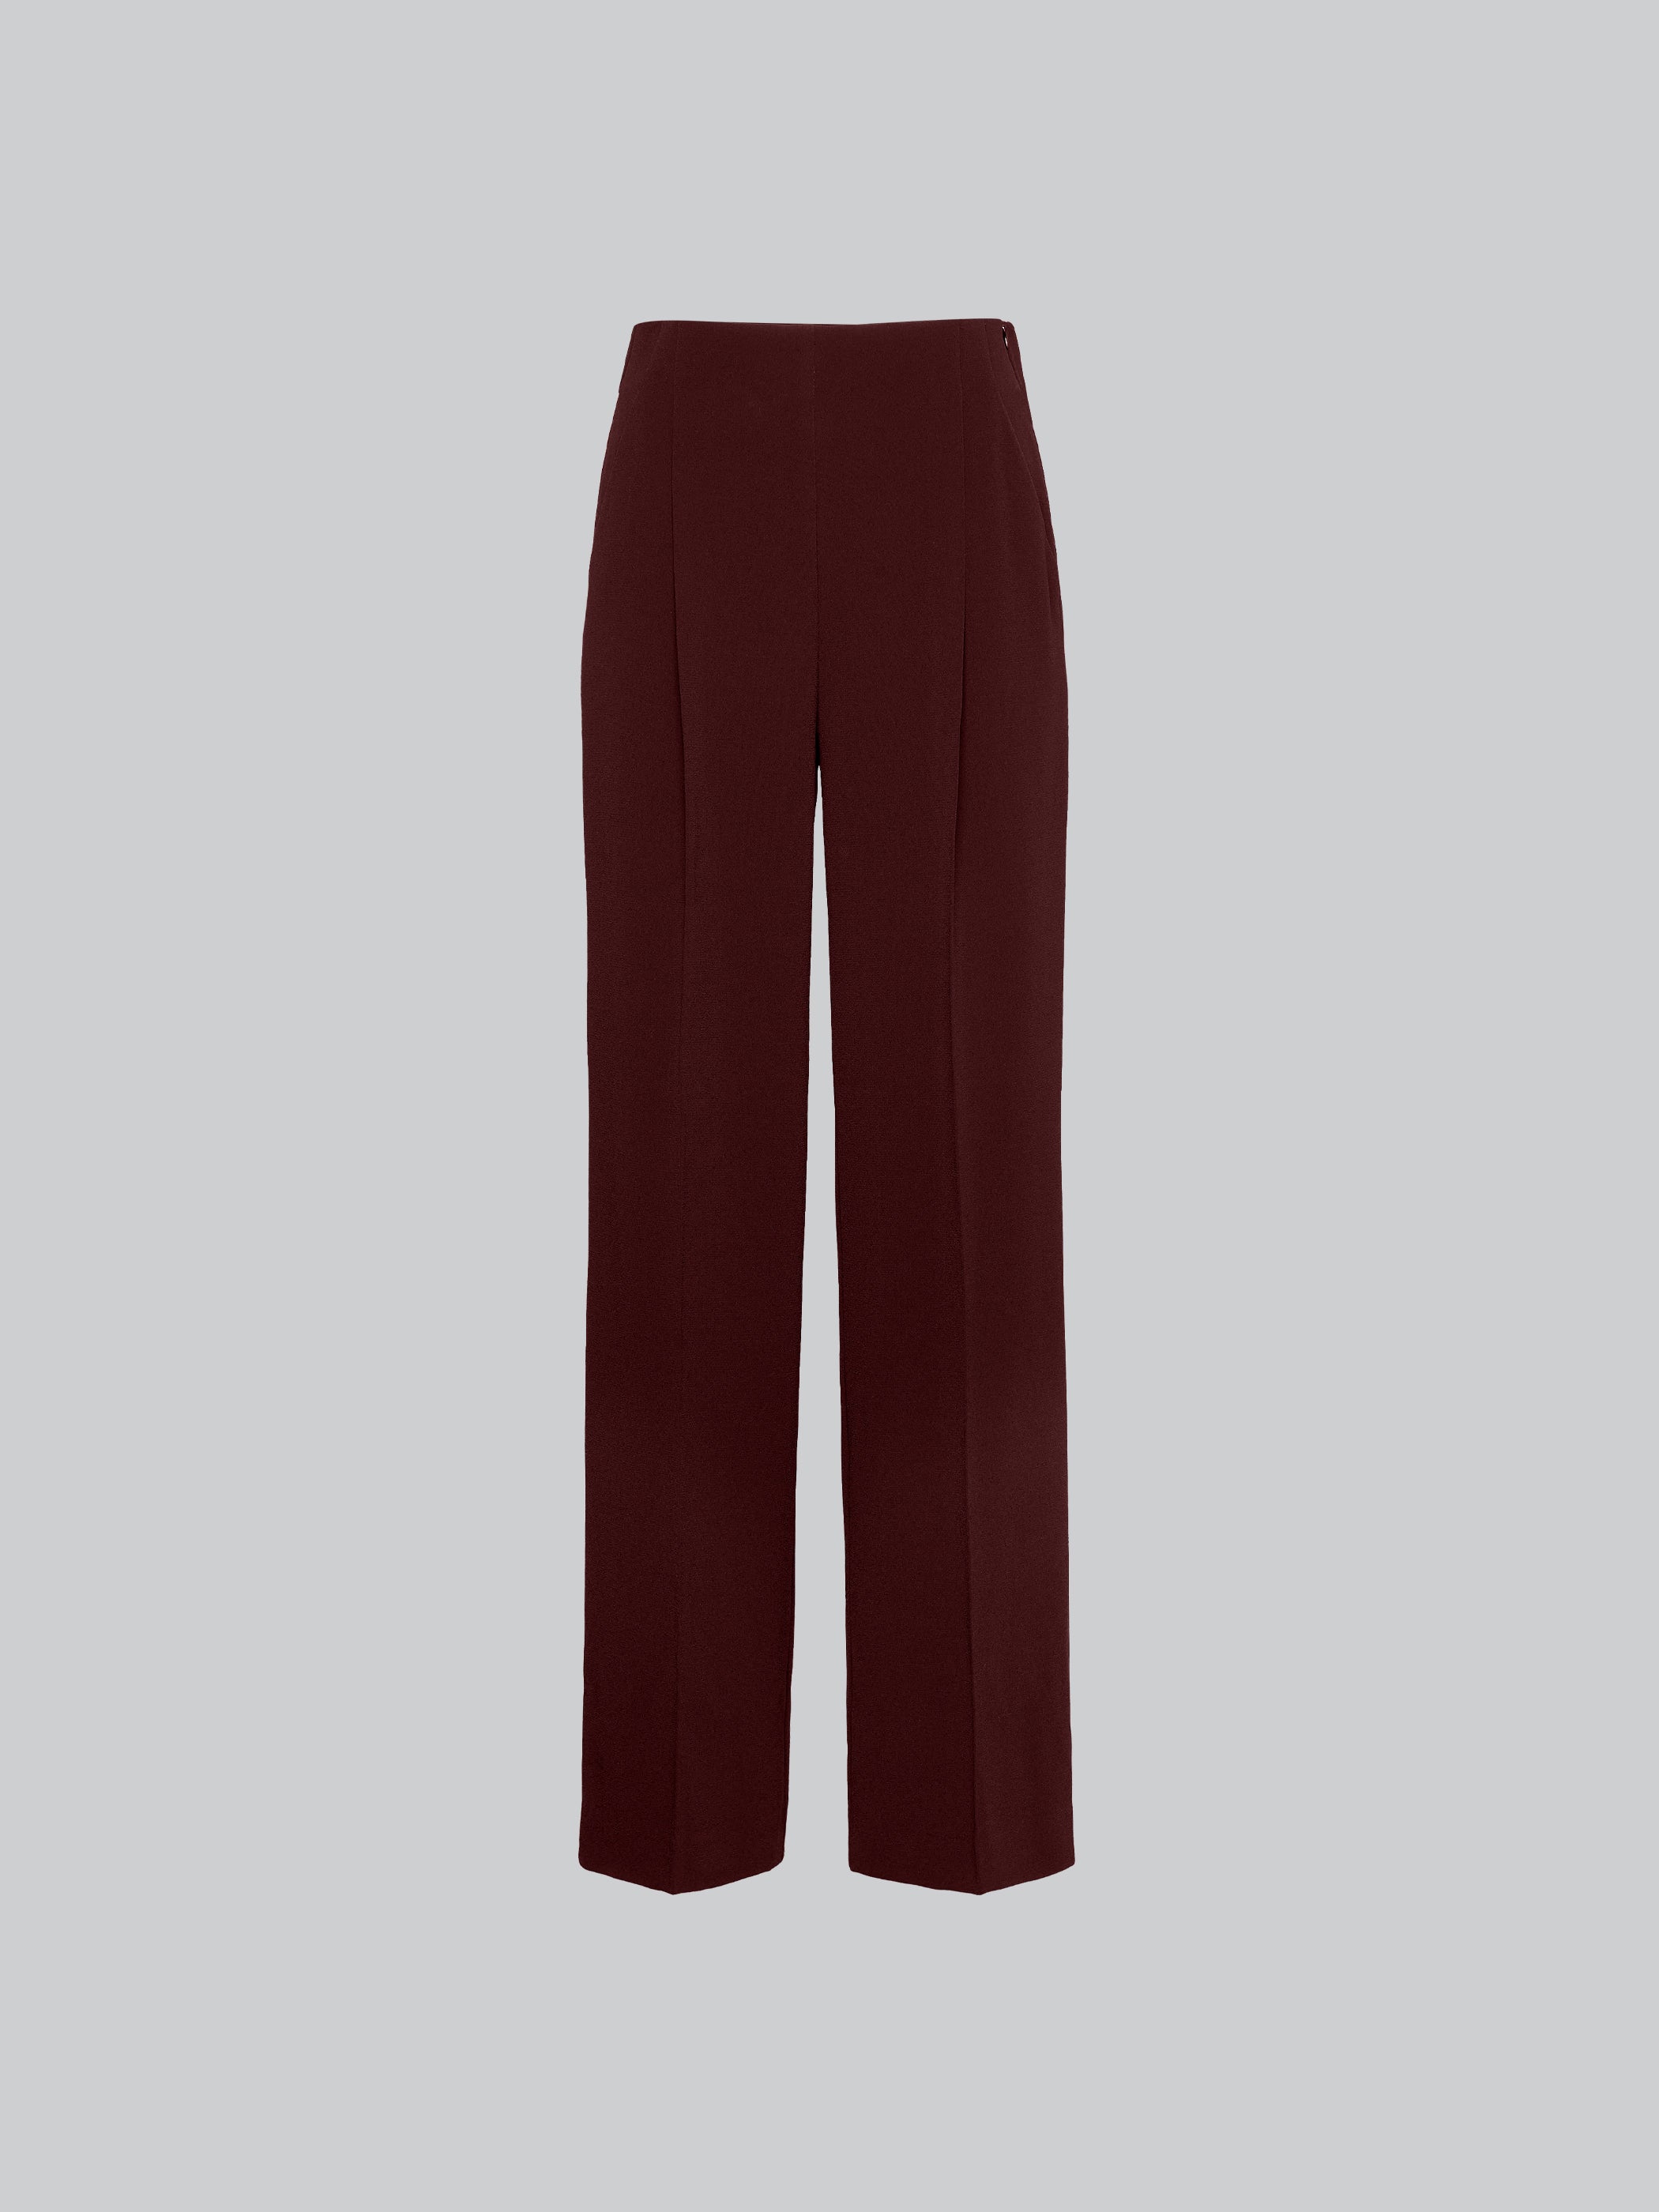 Kamille 3 Trousers